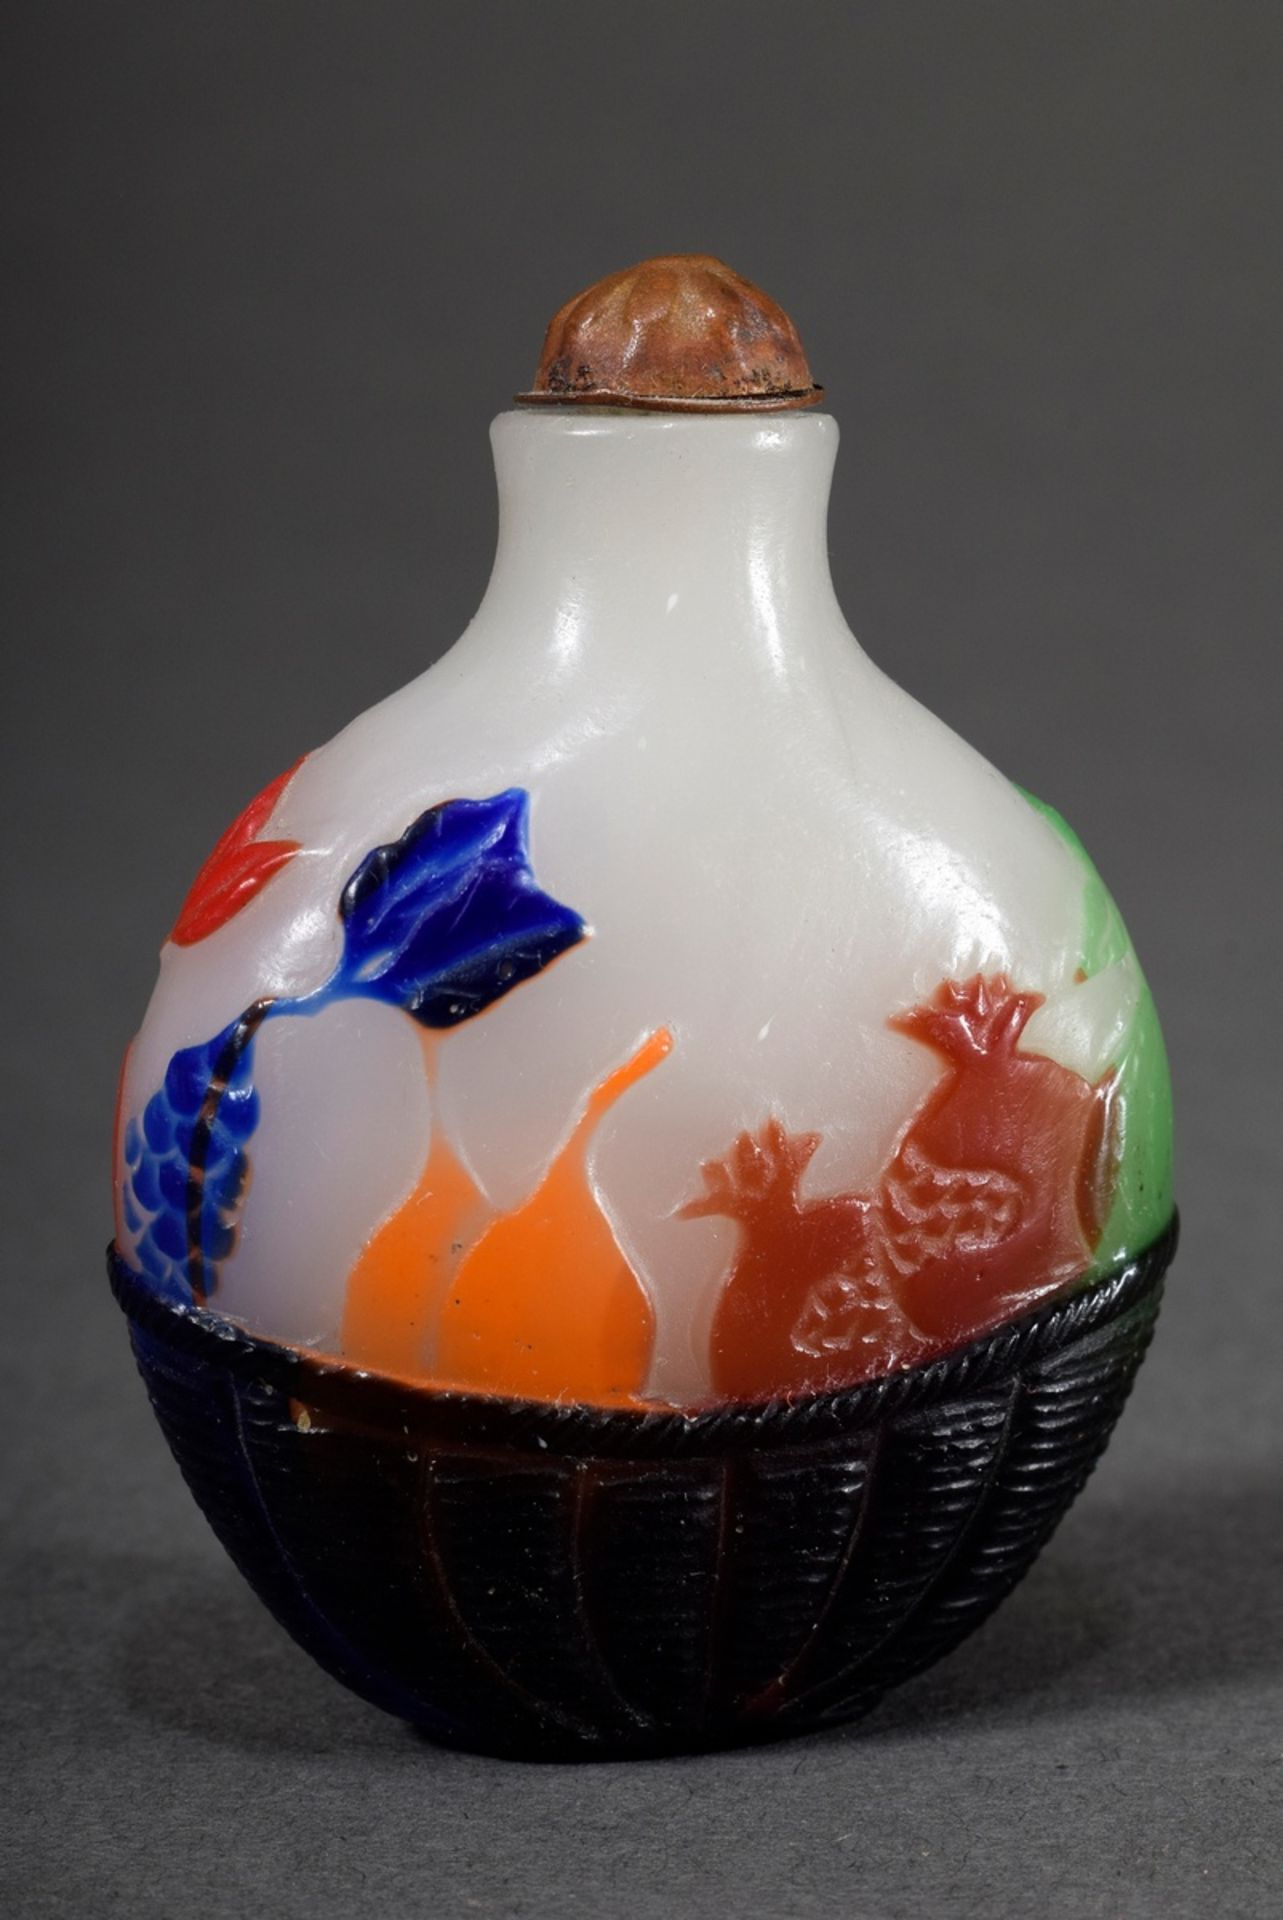 Peking glass snuffbottle with multicoloured overlay "fruits", metal lid, h. 6,5cm, min. bumped